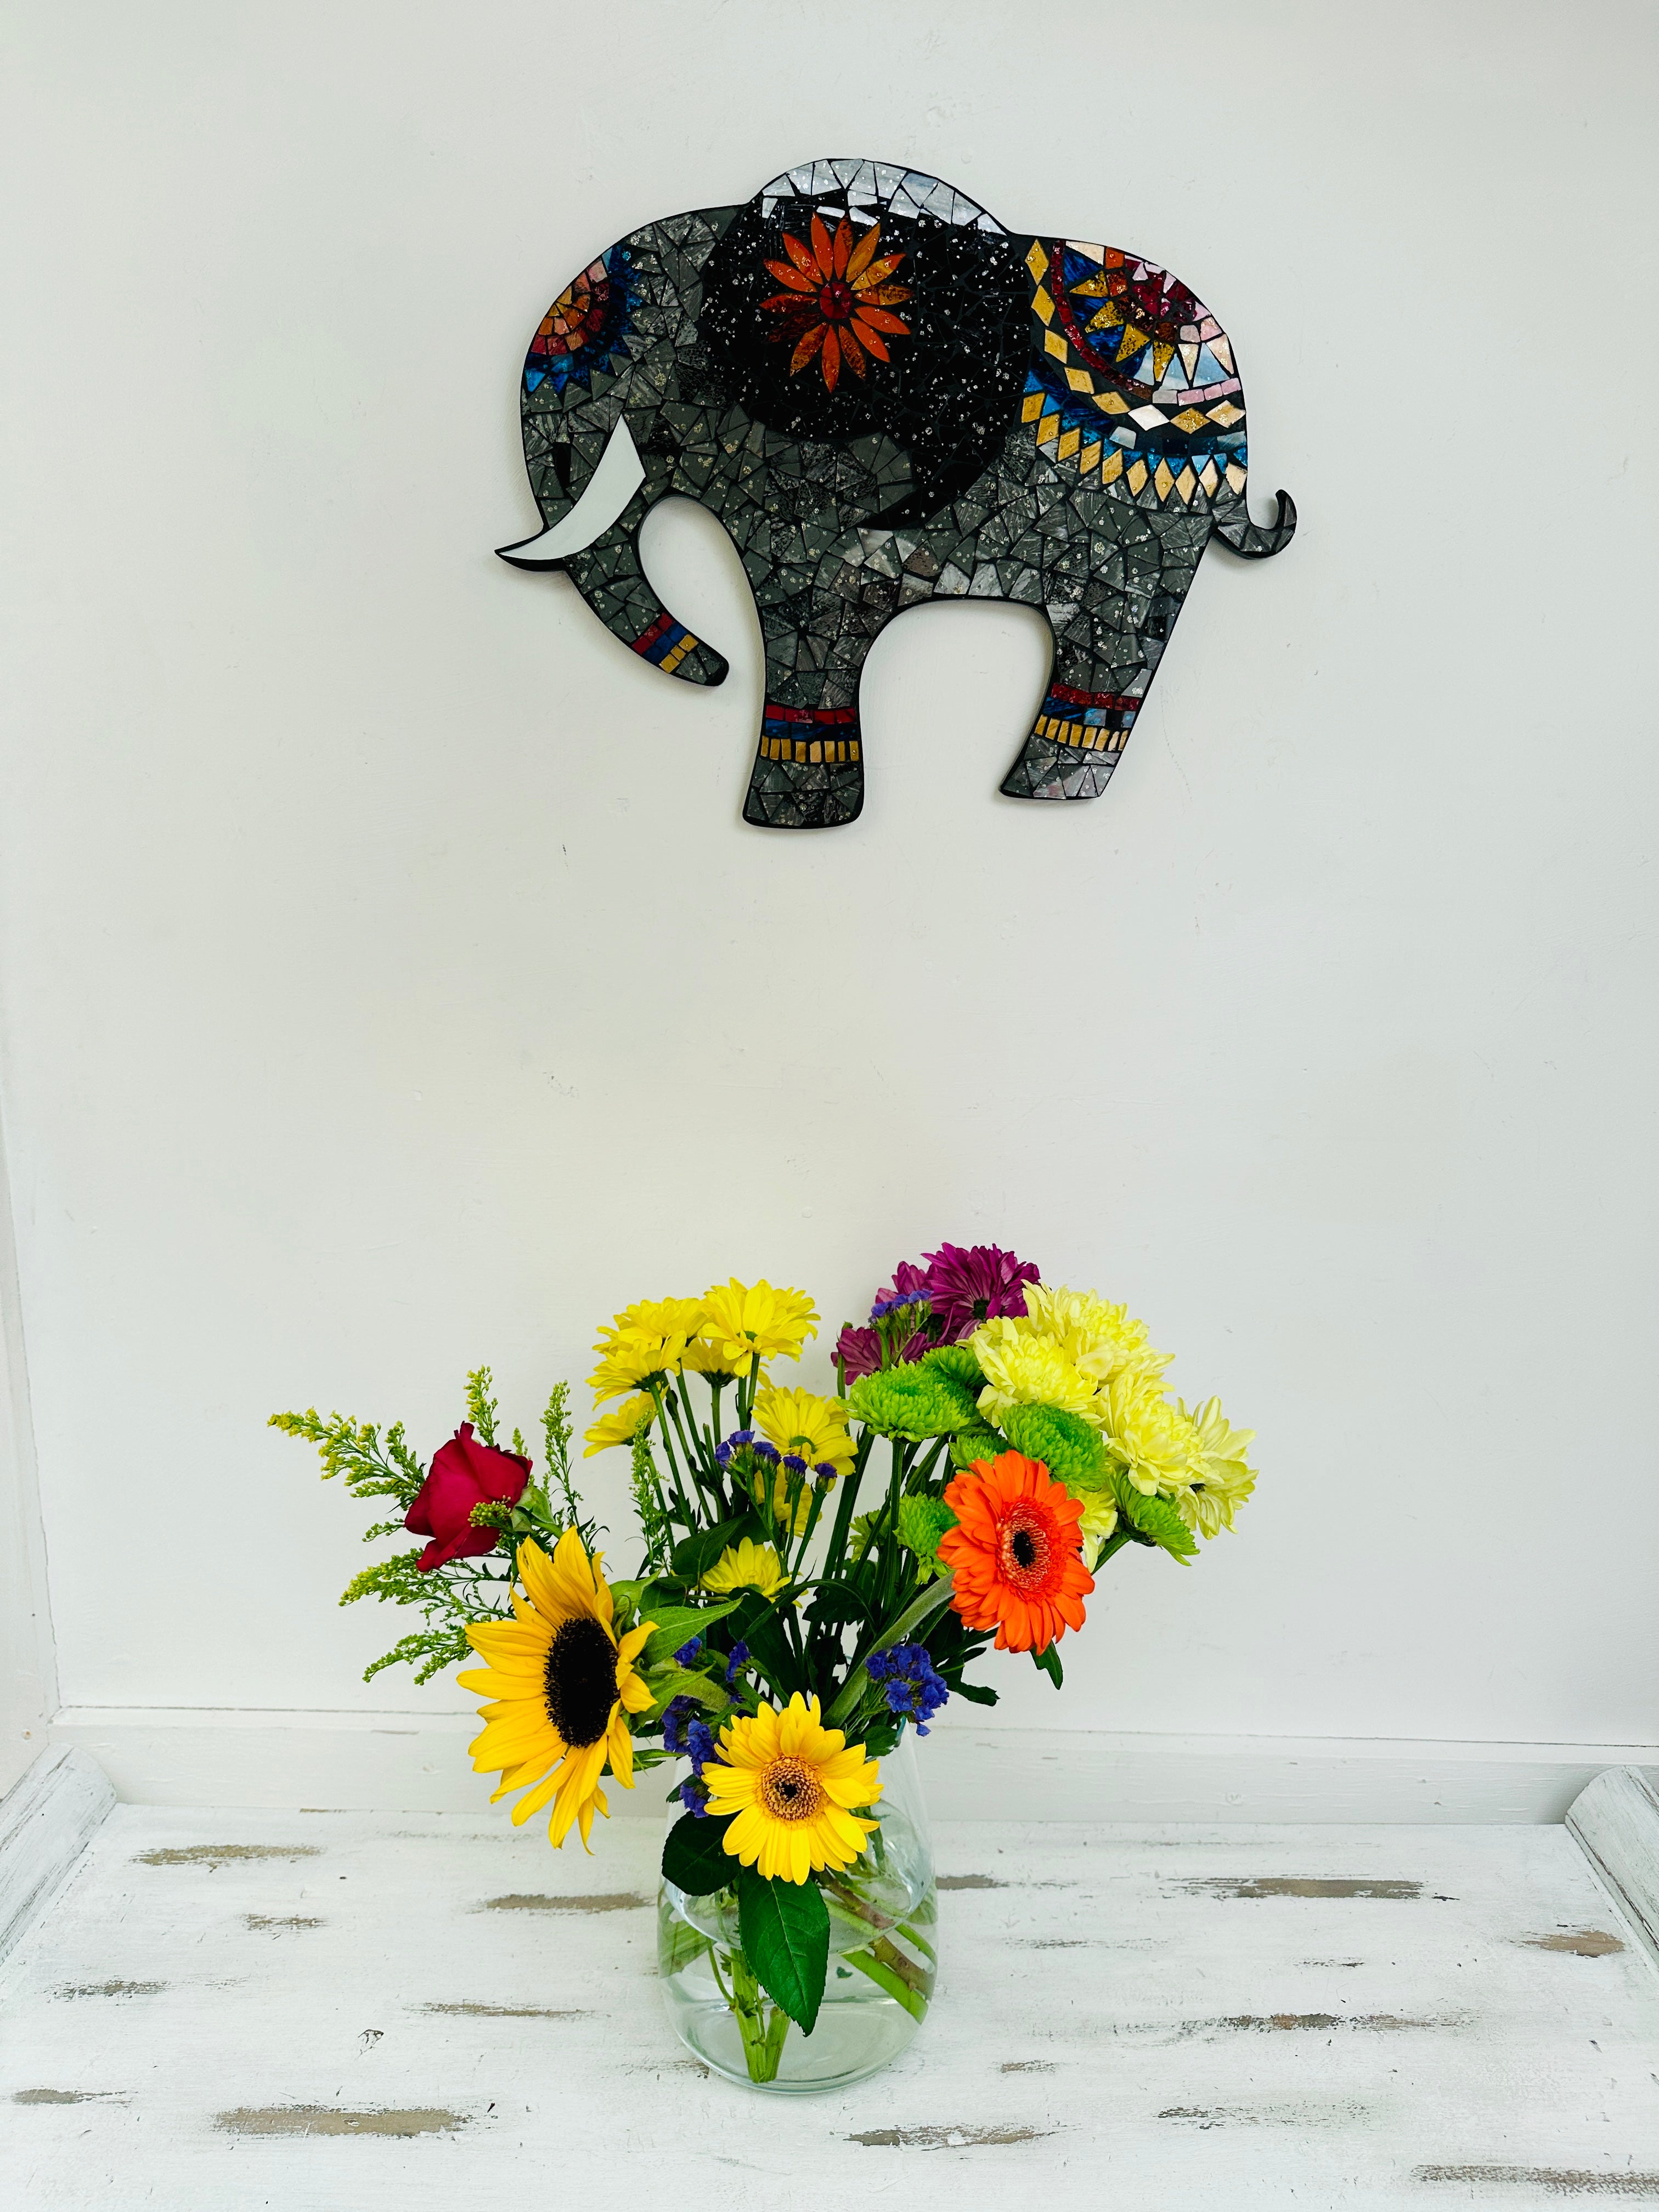 display view of mosaic elephant on wall